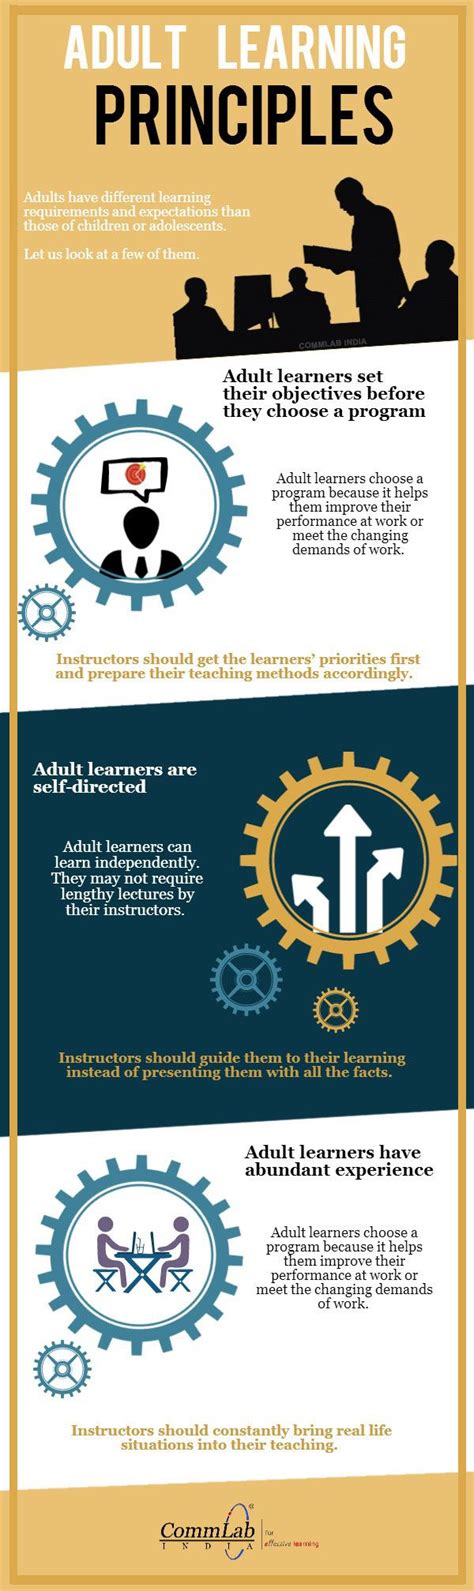 Adult Learning Principles An Infographic It Training Training And